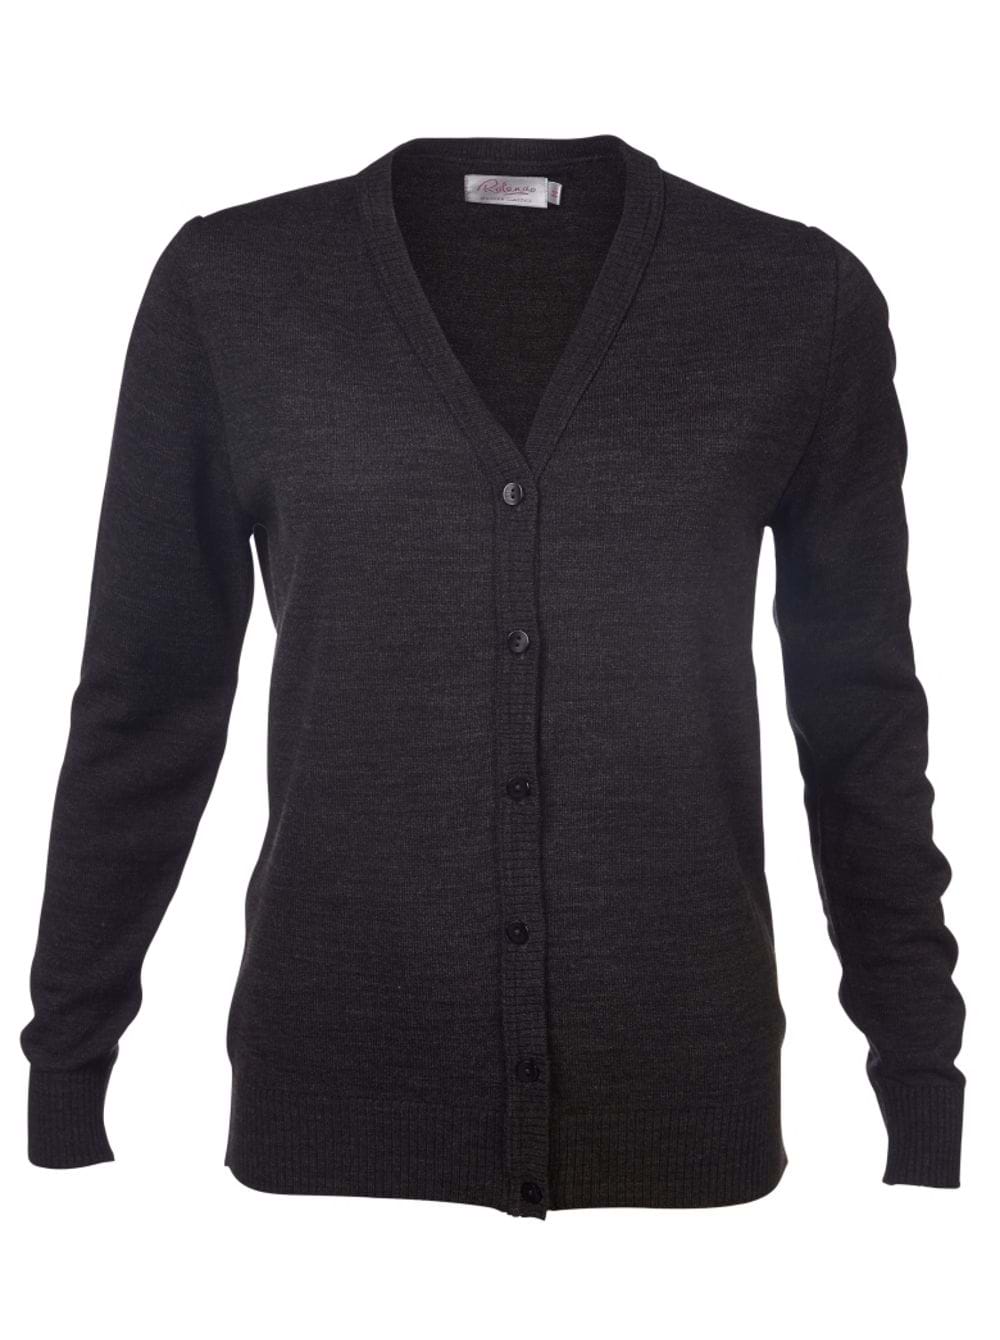 Kate L/S Cardigan - Charcoal Grey / S